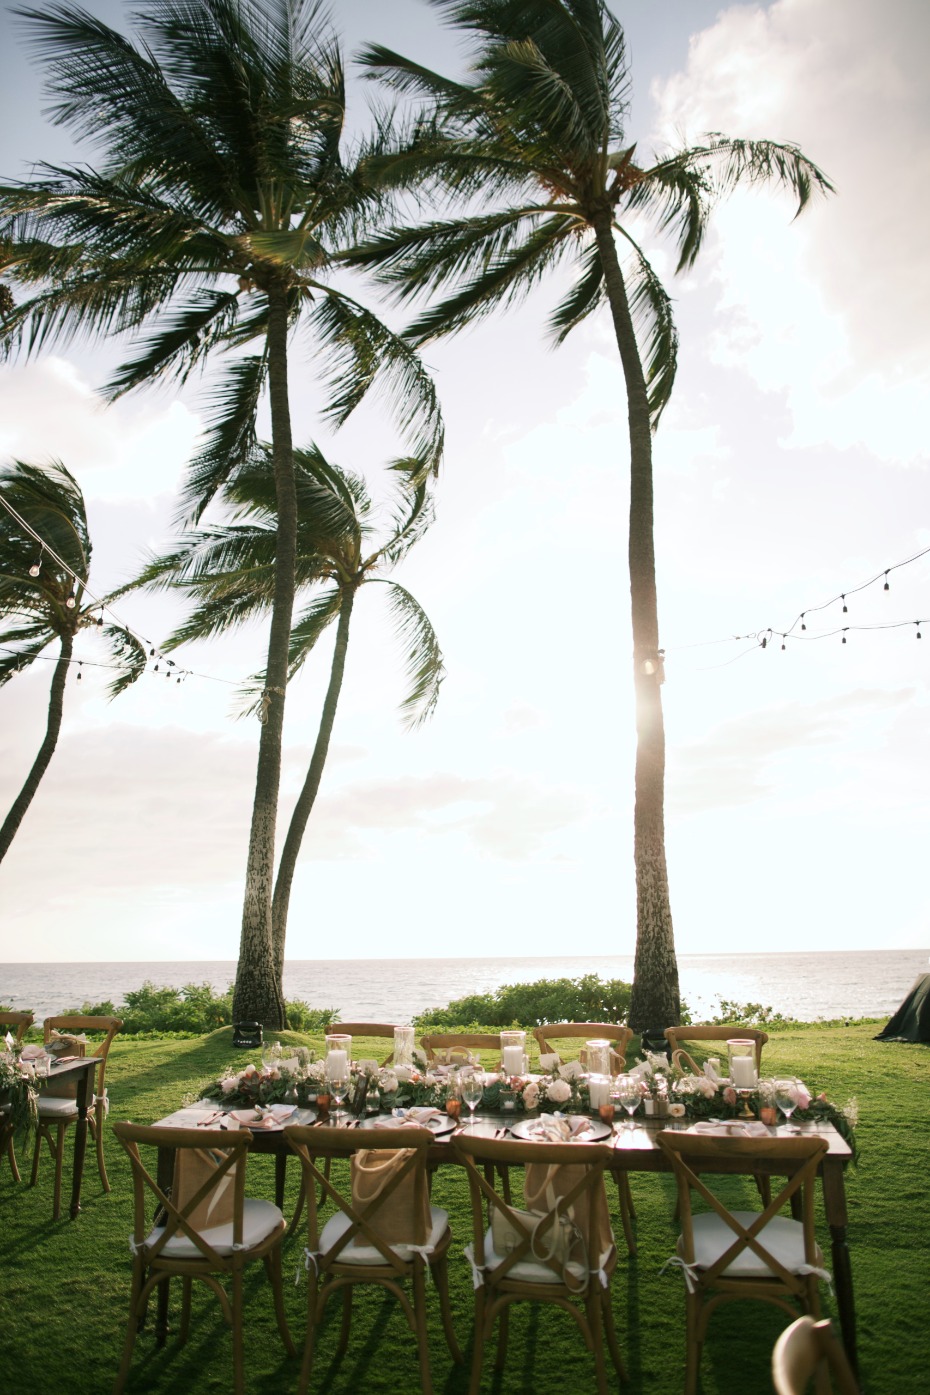 Beautiful reception where the palm trees sway